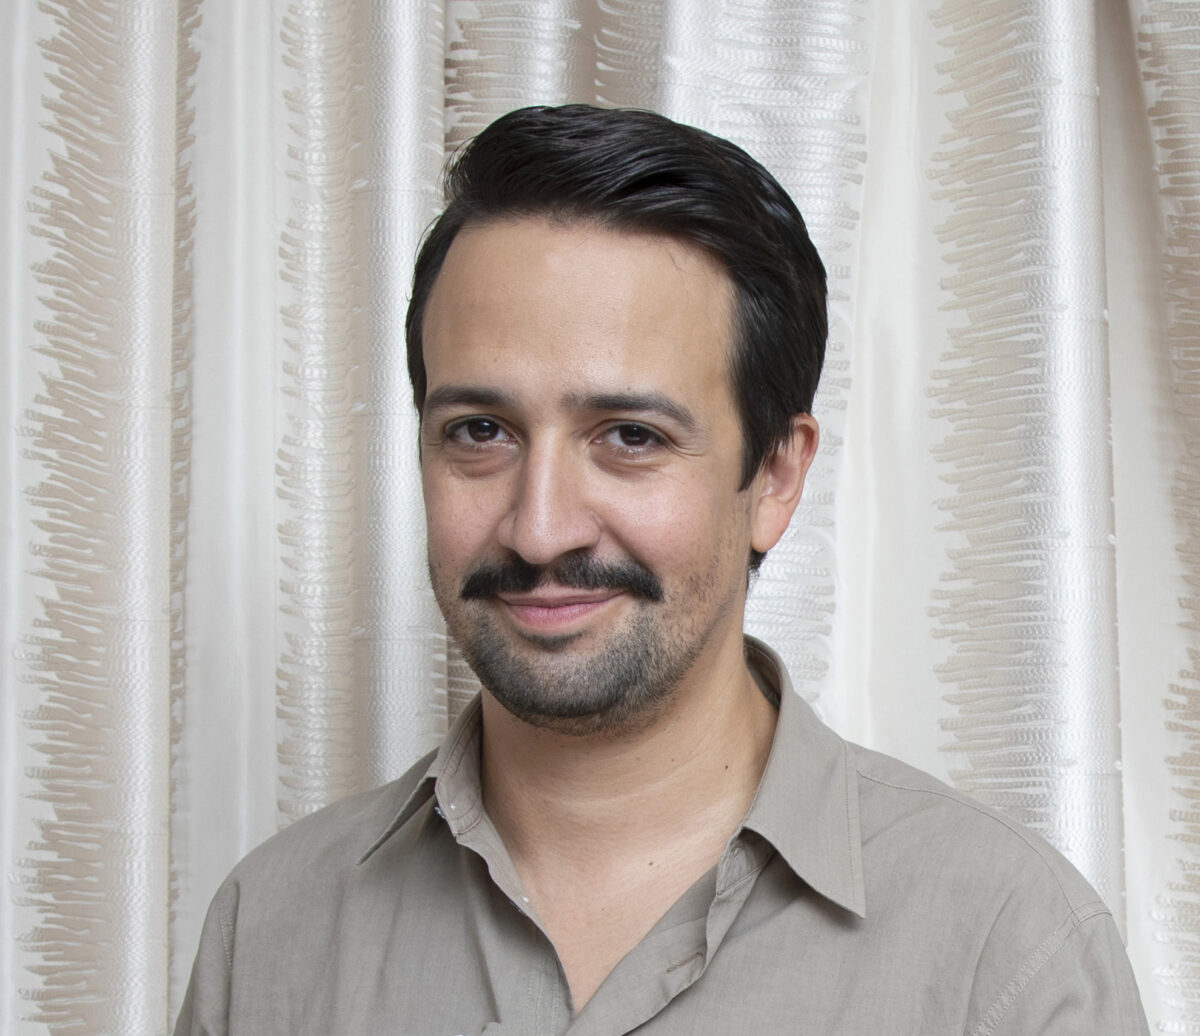 It's Lin-Manuel Miranda again, this time in a light gray button down, his hair combed all nicely, his classic smirk on his face.